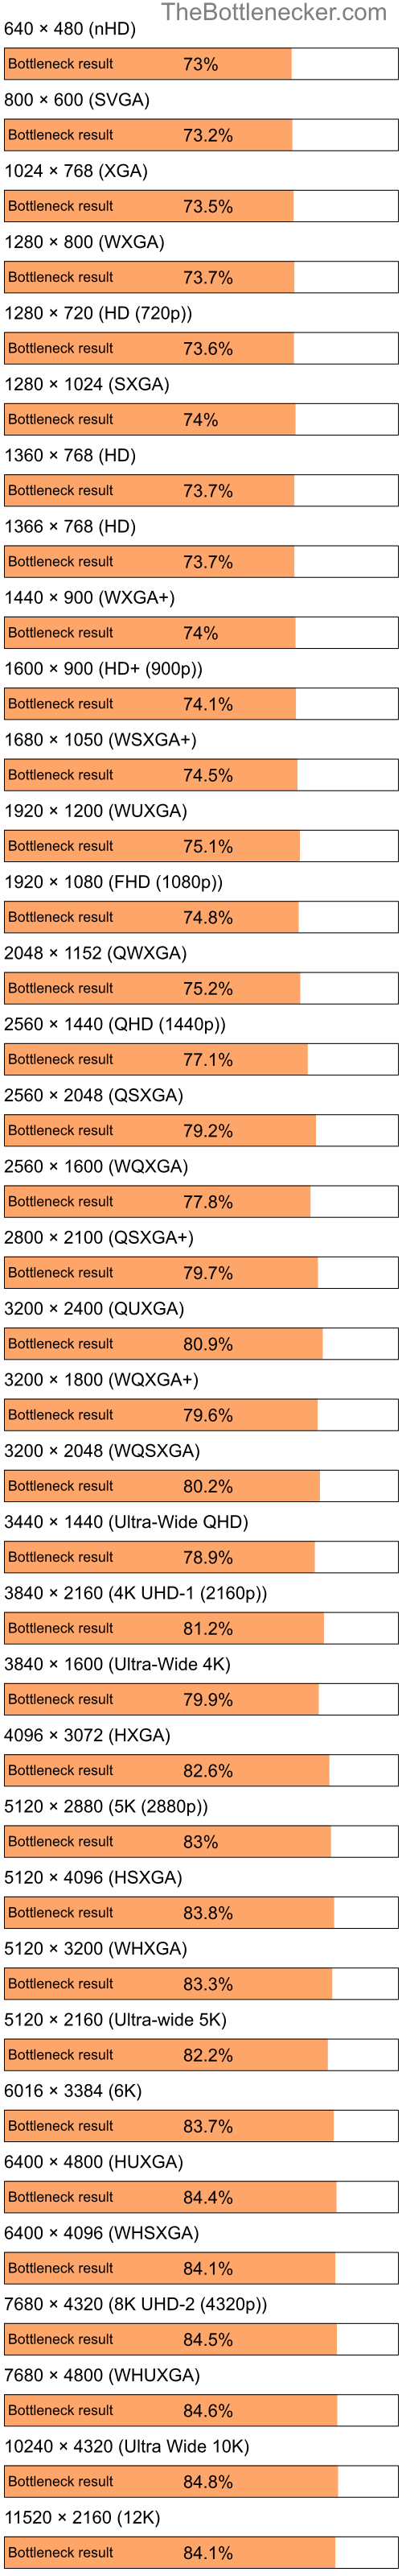 Bottleneck results by resolution for Intel Pentium 4 and NVIDIA GeForce 8100 in Graphic Card Intense Tasks